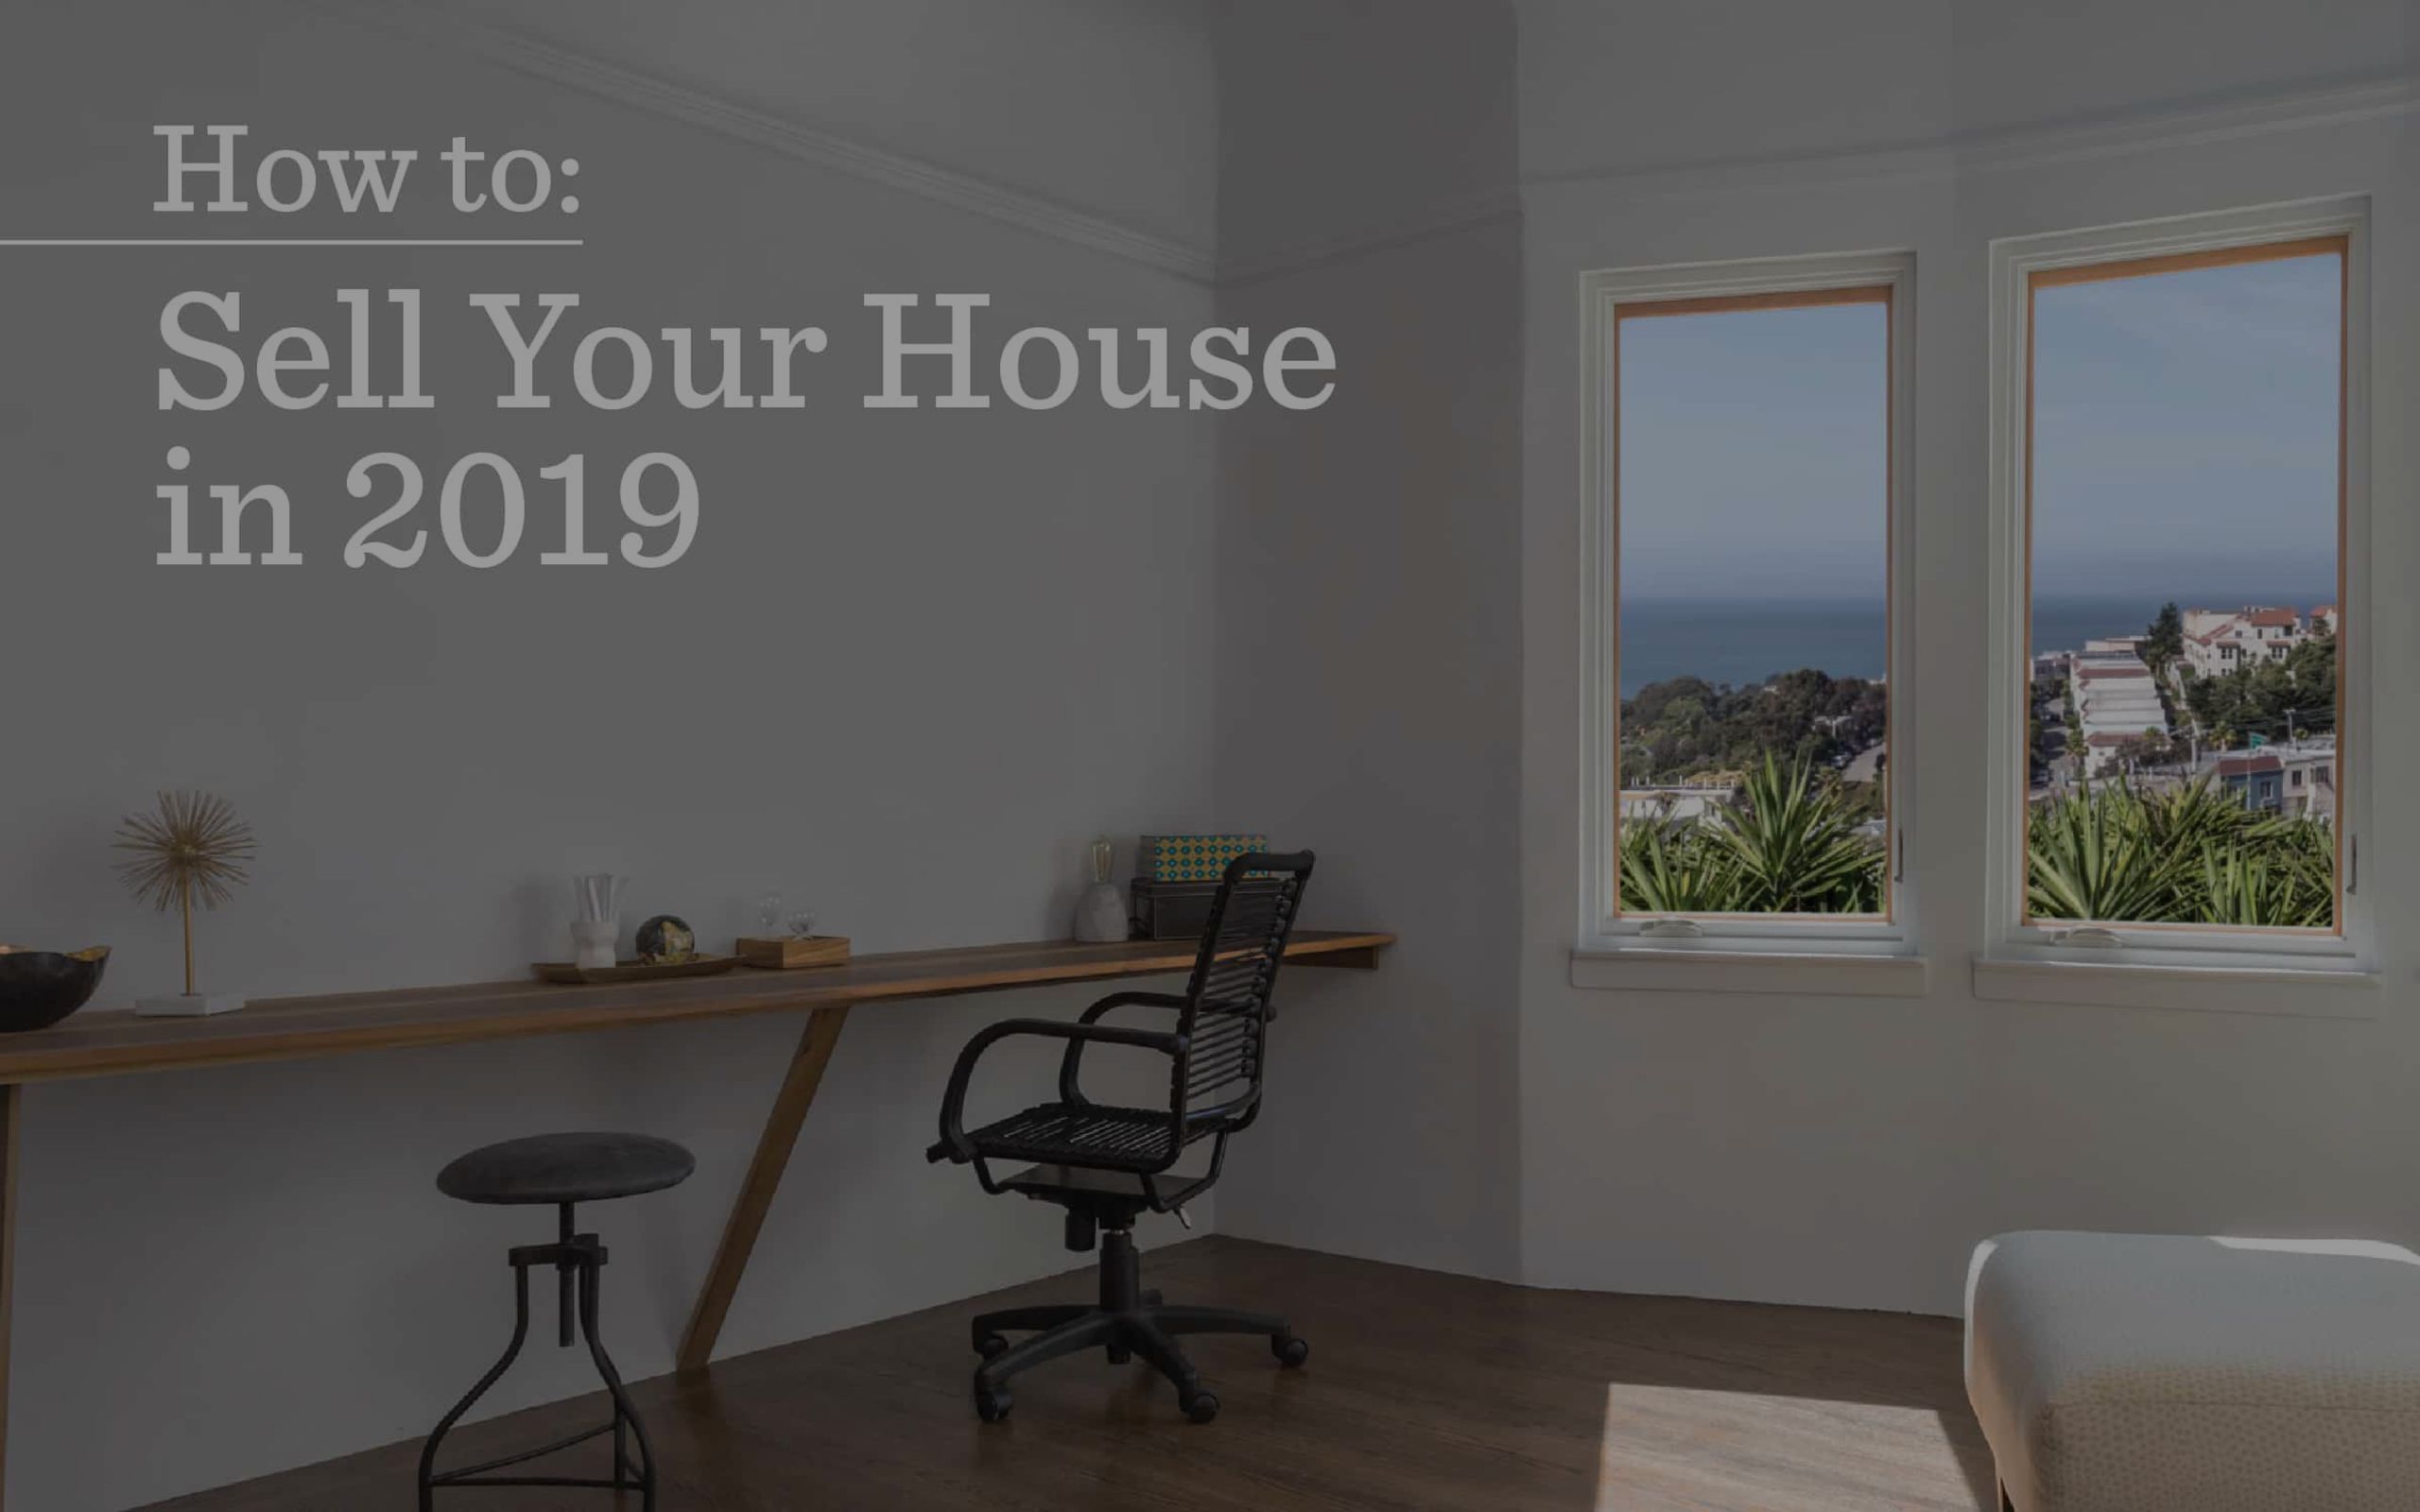 How to Sell Your Home in 2019